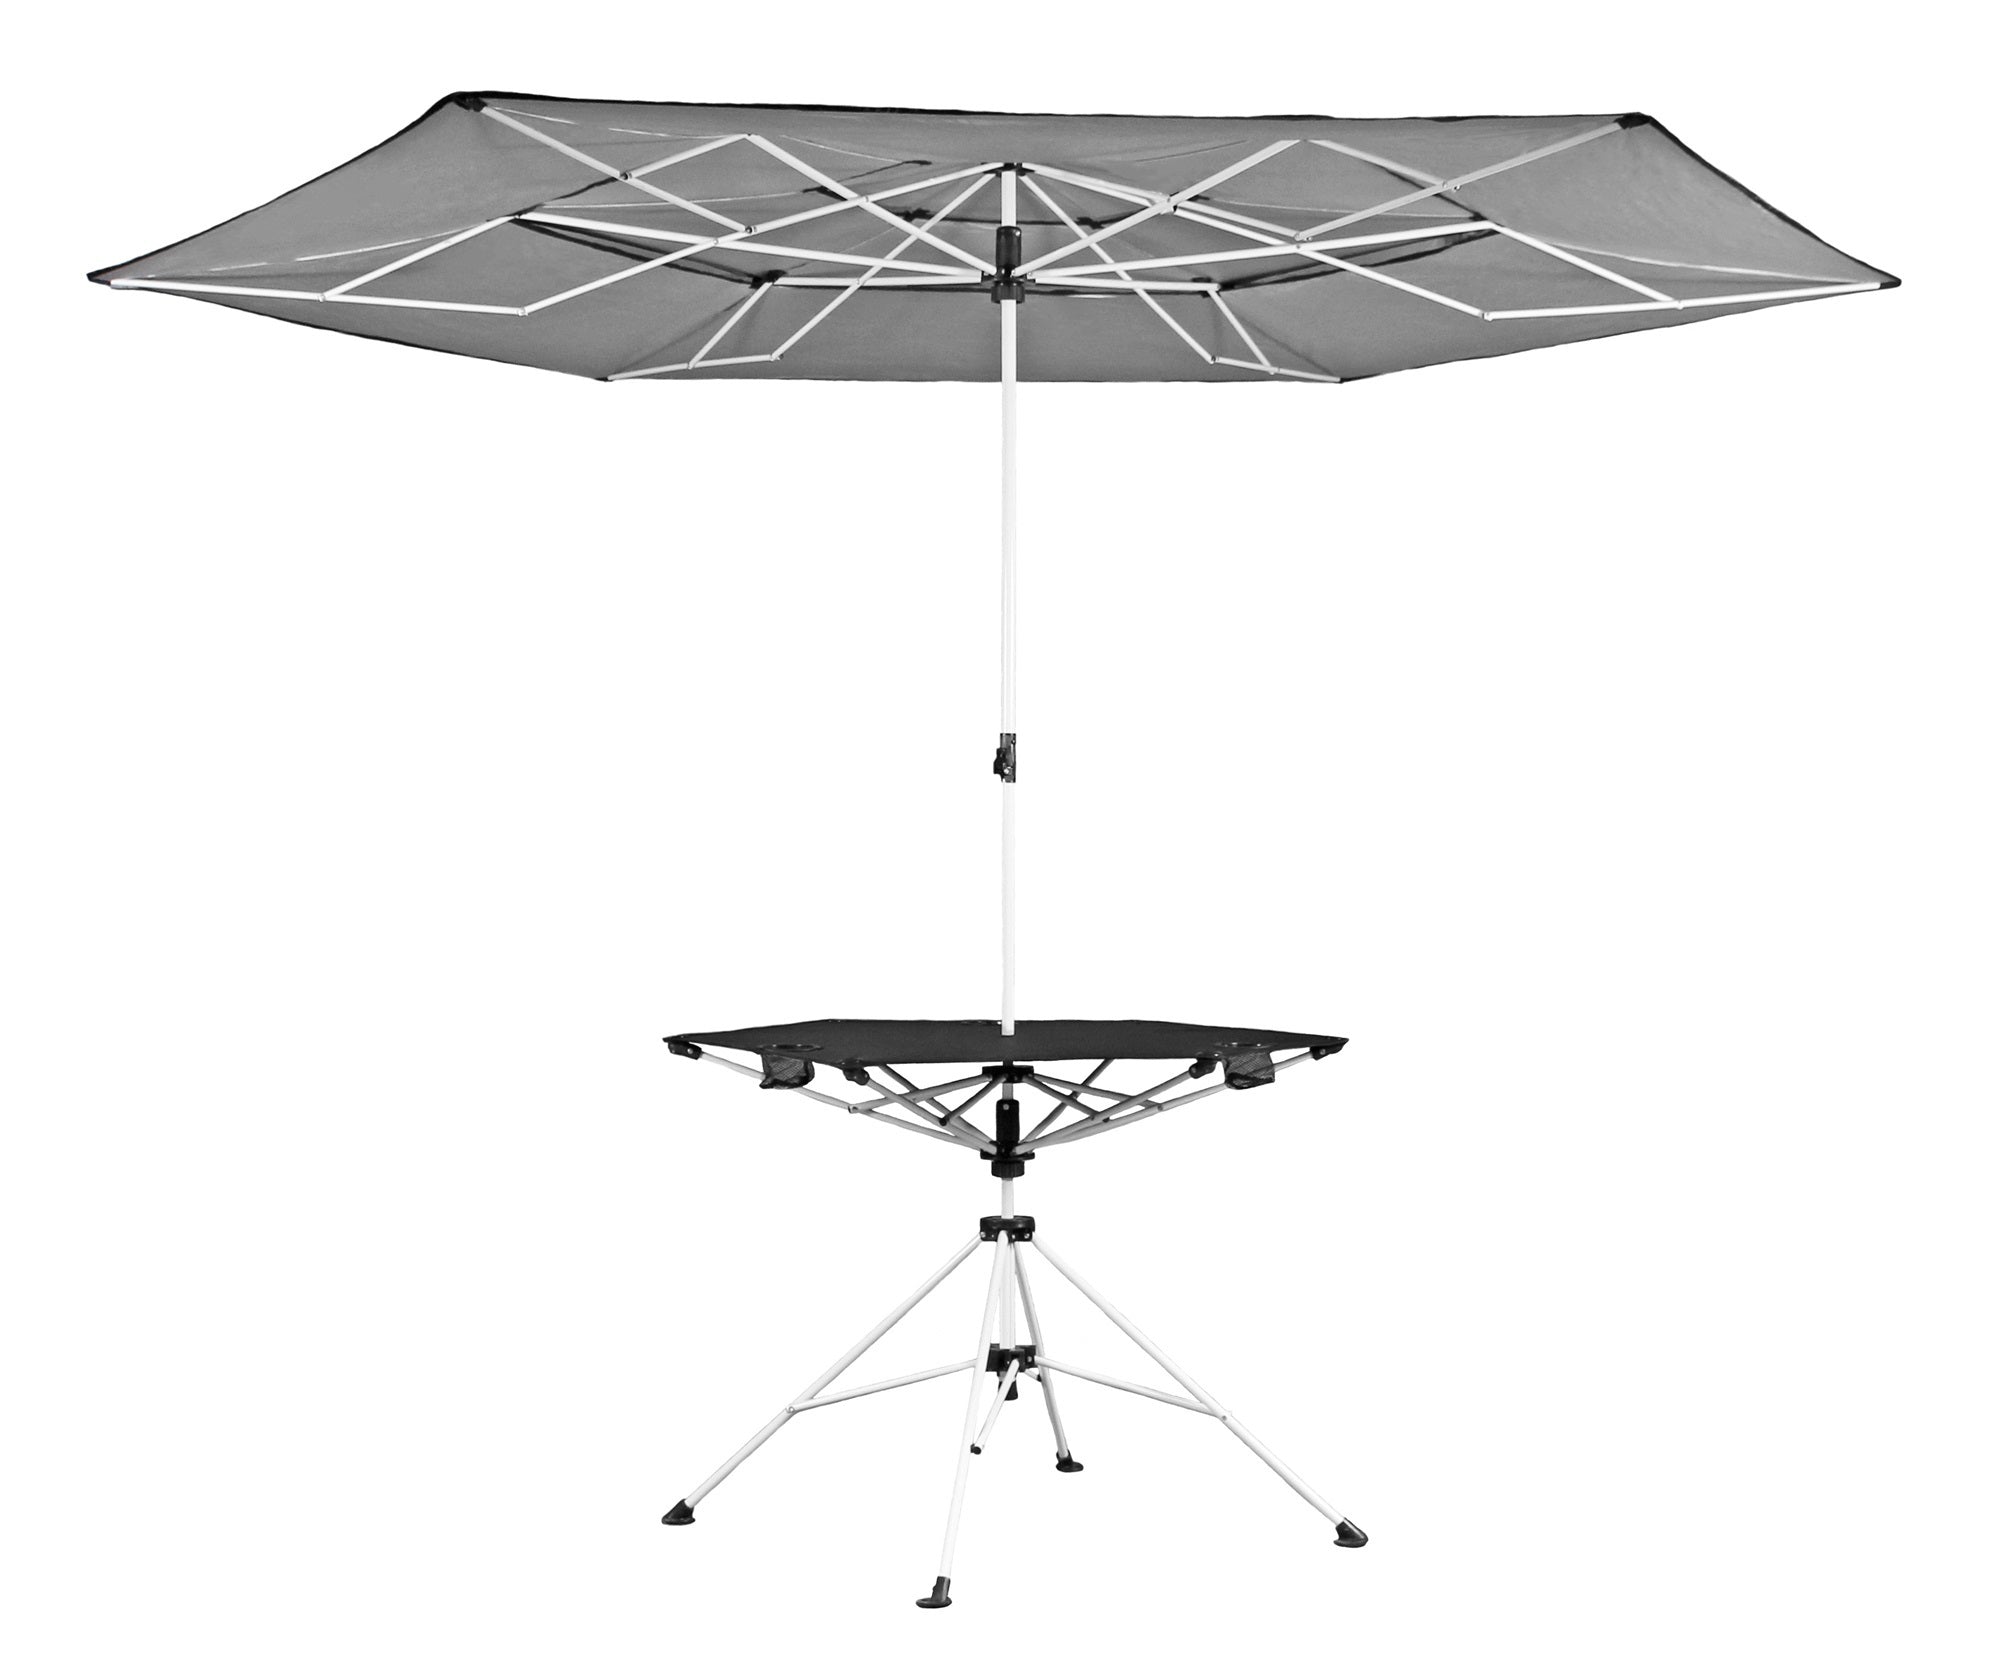 Zenithen Limited Black Roof Outdoor Folding Transportable Canopy Table With Cup Holders, Black